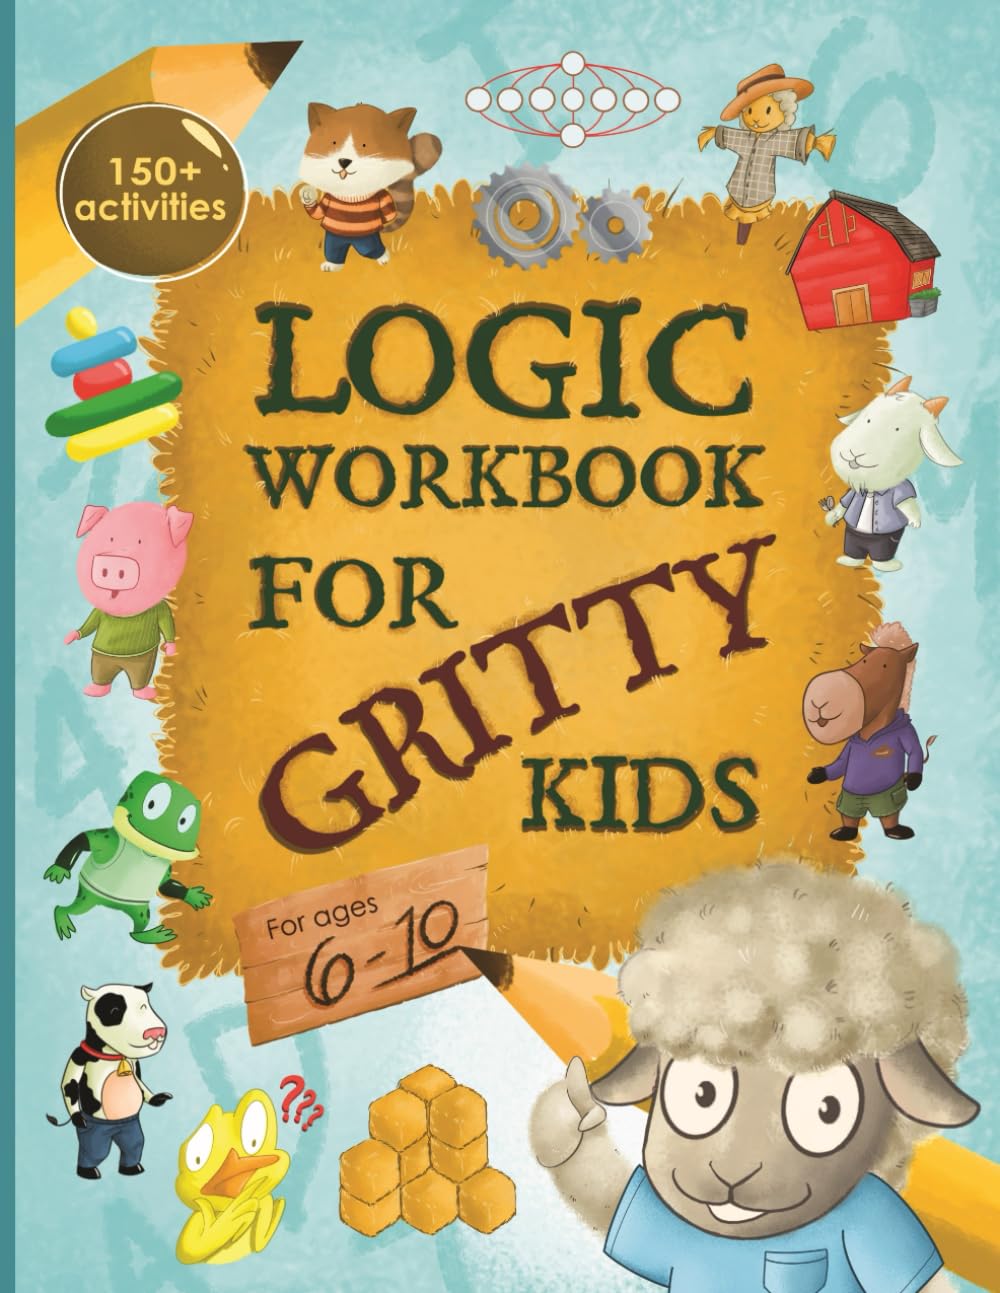 Logic Workbook for Gritty Kids: Spatial reasoning, math puzzles, word games, logic problems, activities, two-player games. (The Gritty Little Lamb com by Allbaugh, Dan